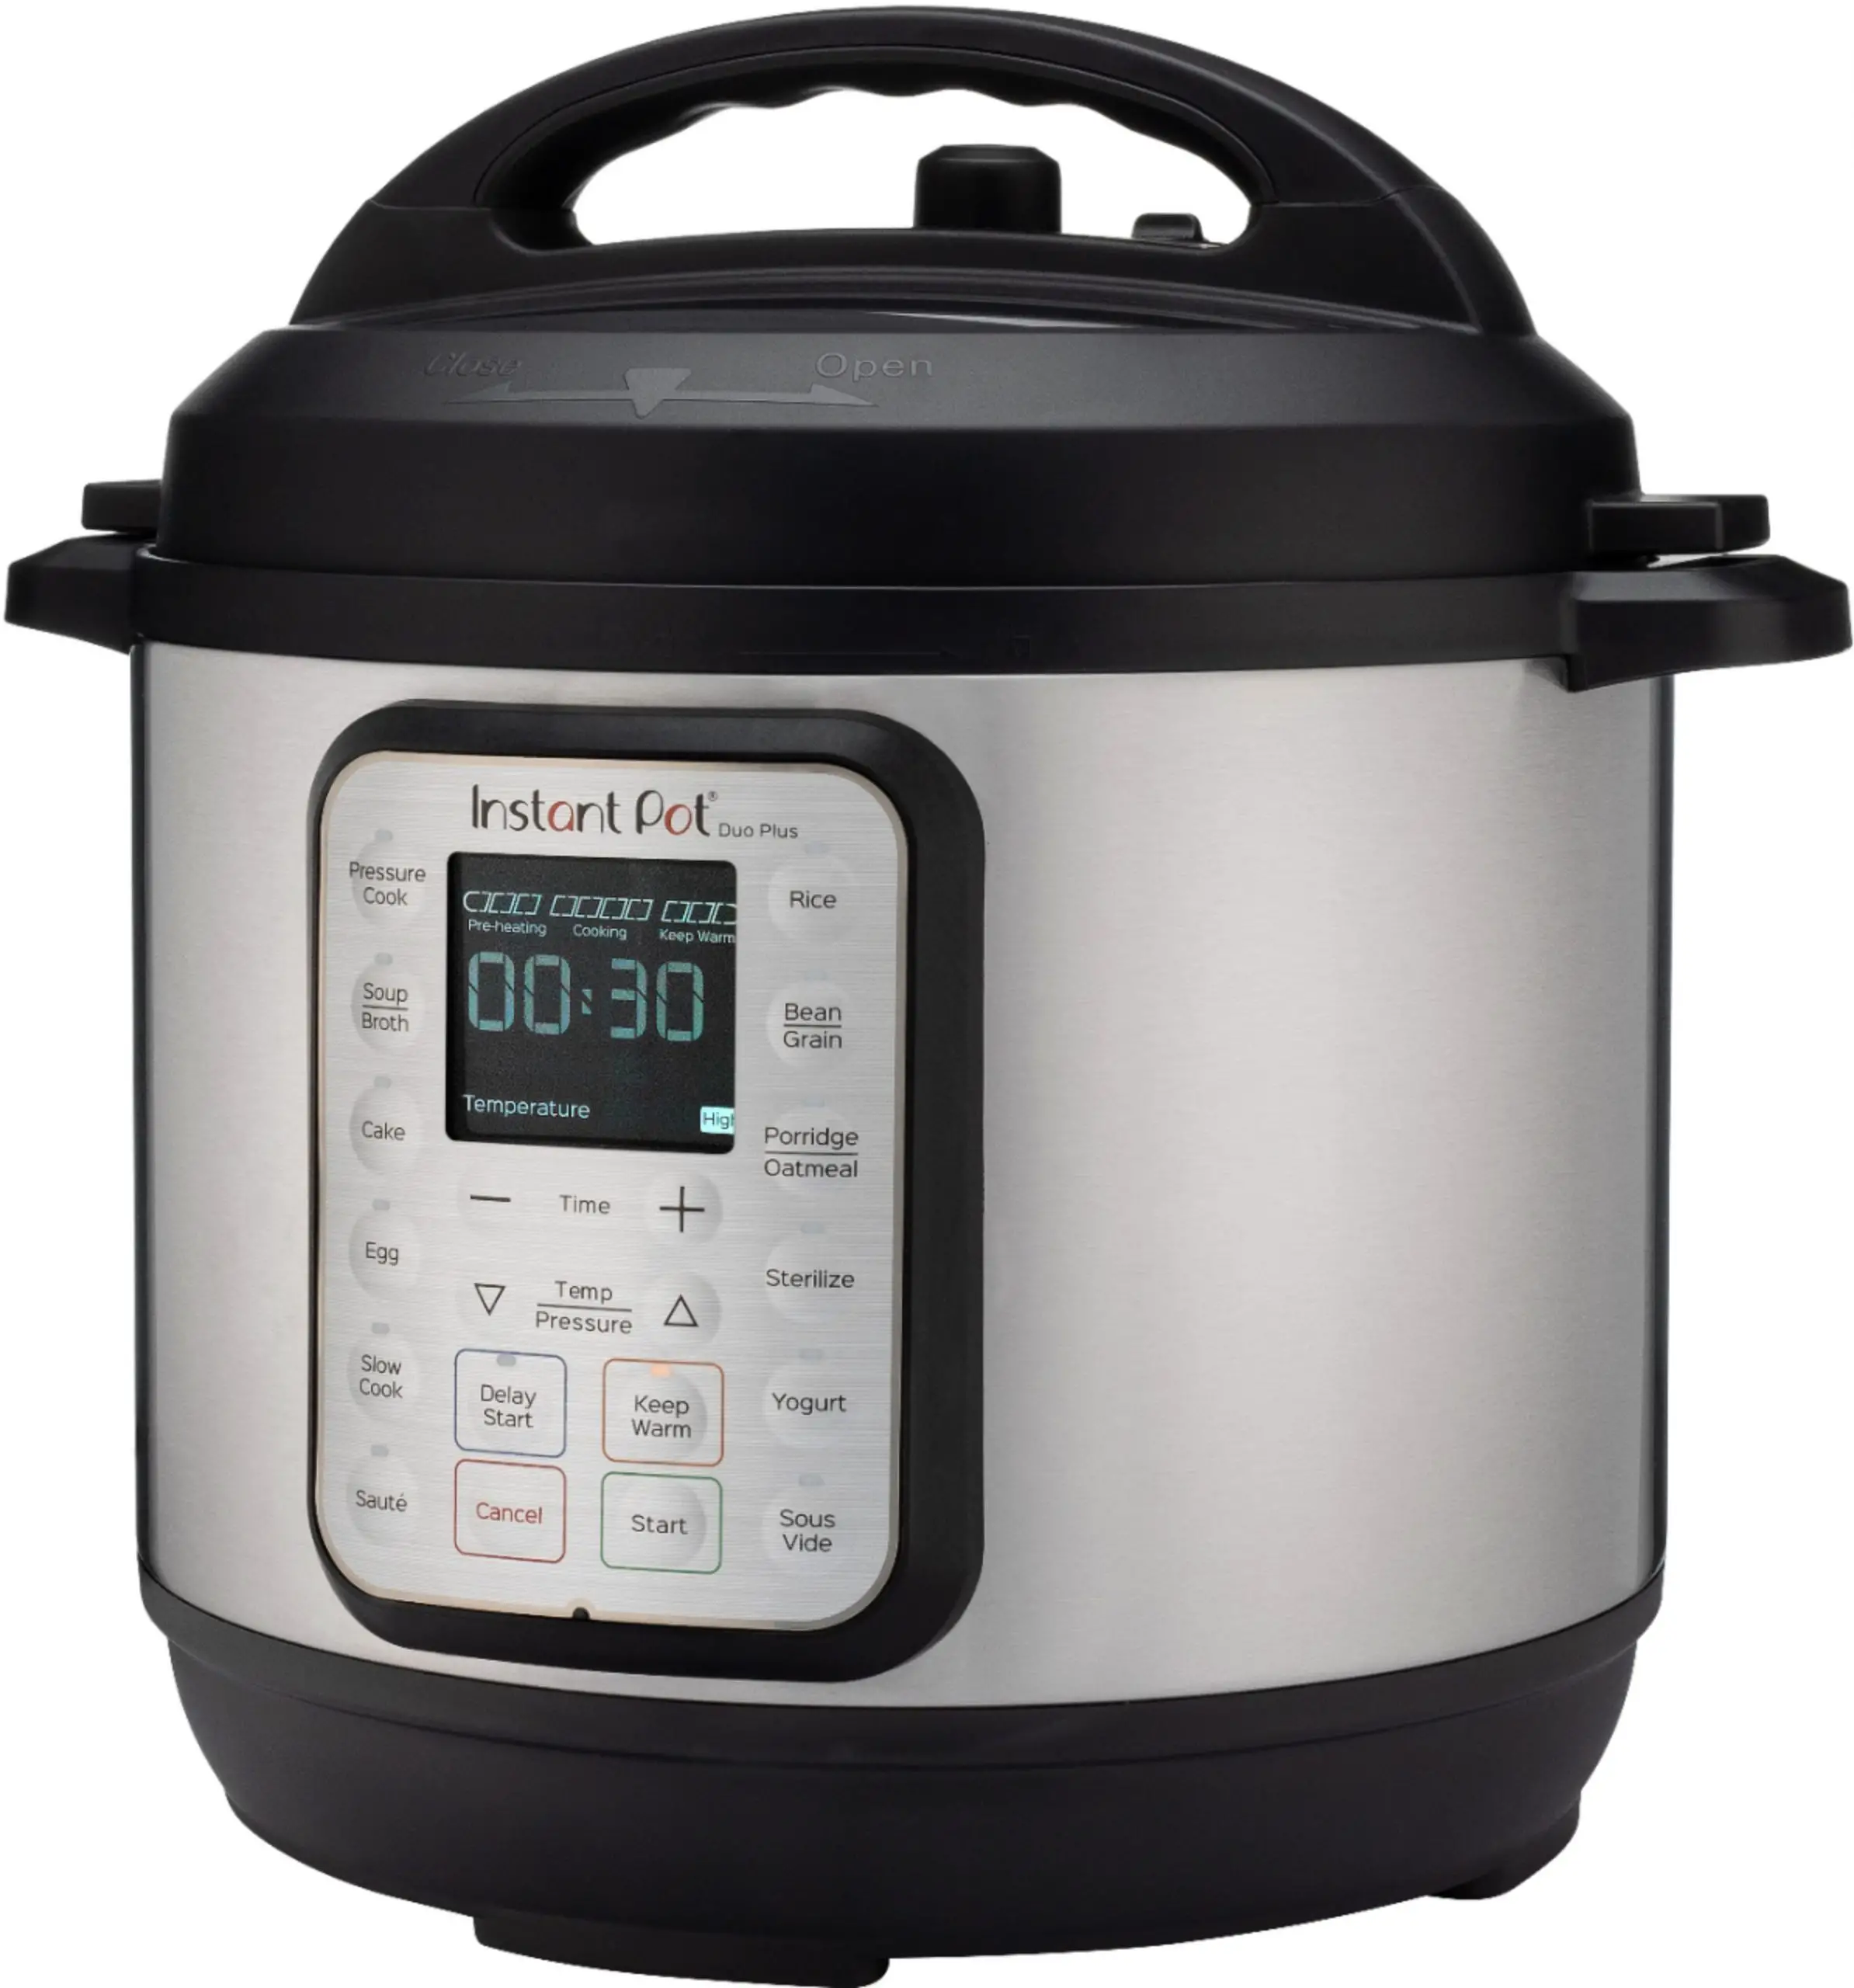 Questions and Answers: Instant Pot 6 Quart Duo Plus 9